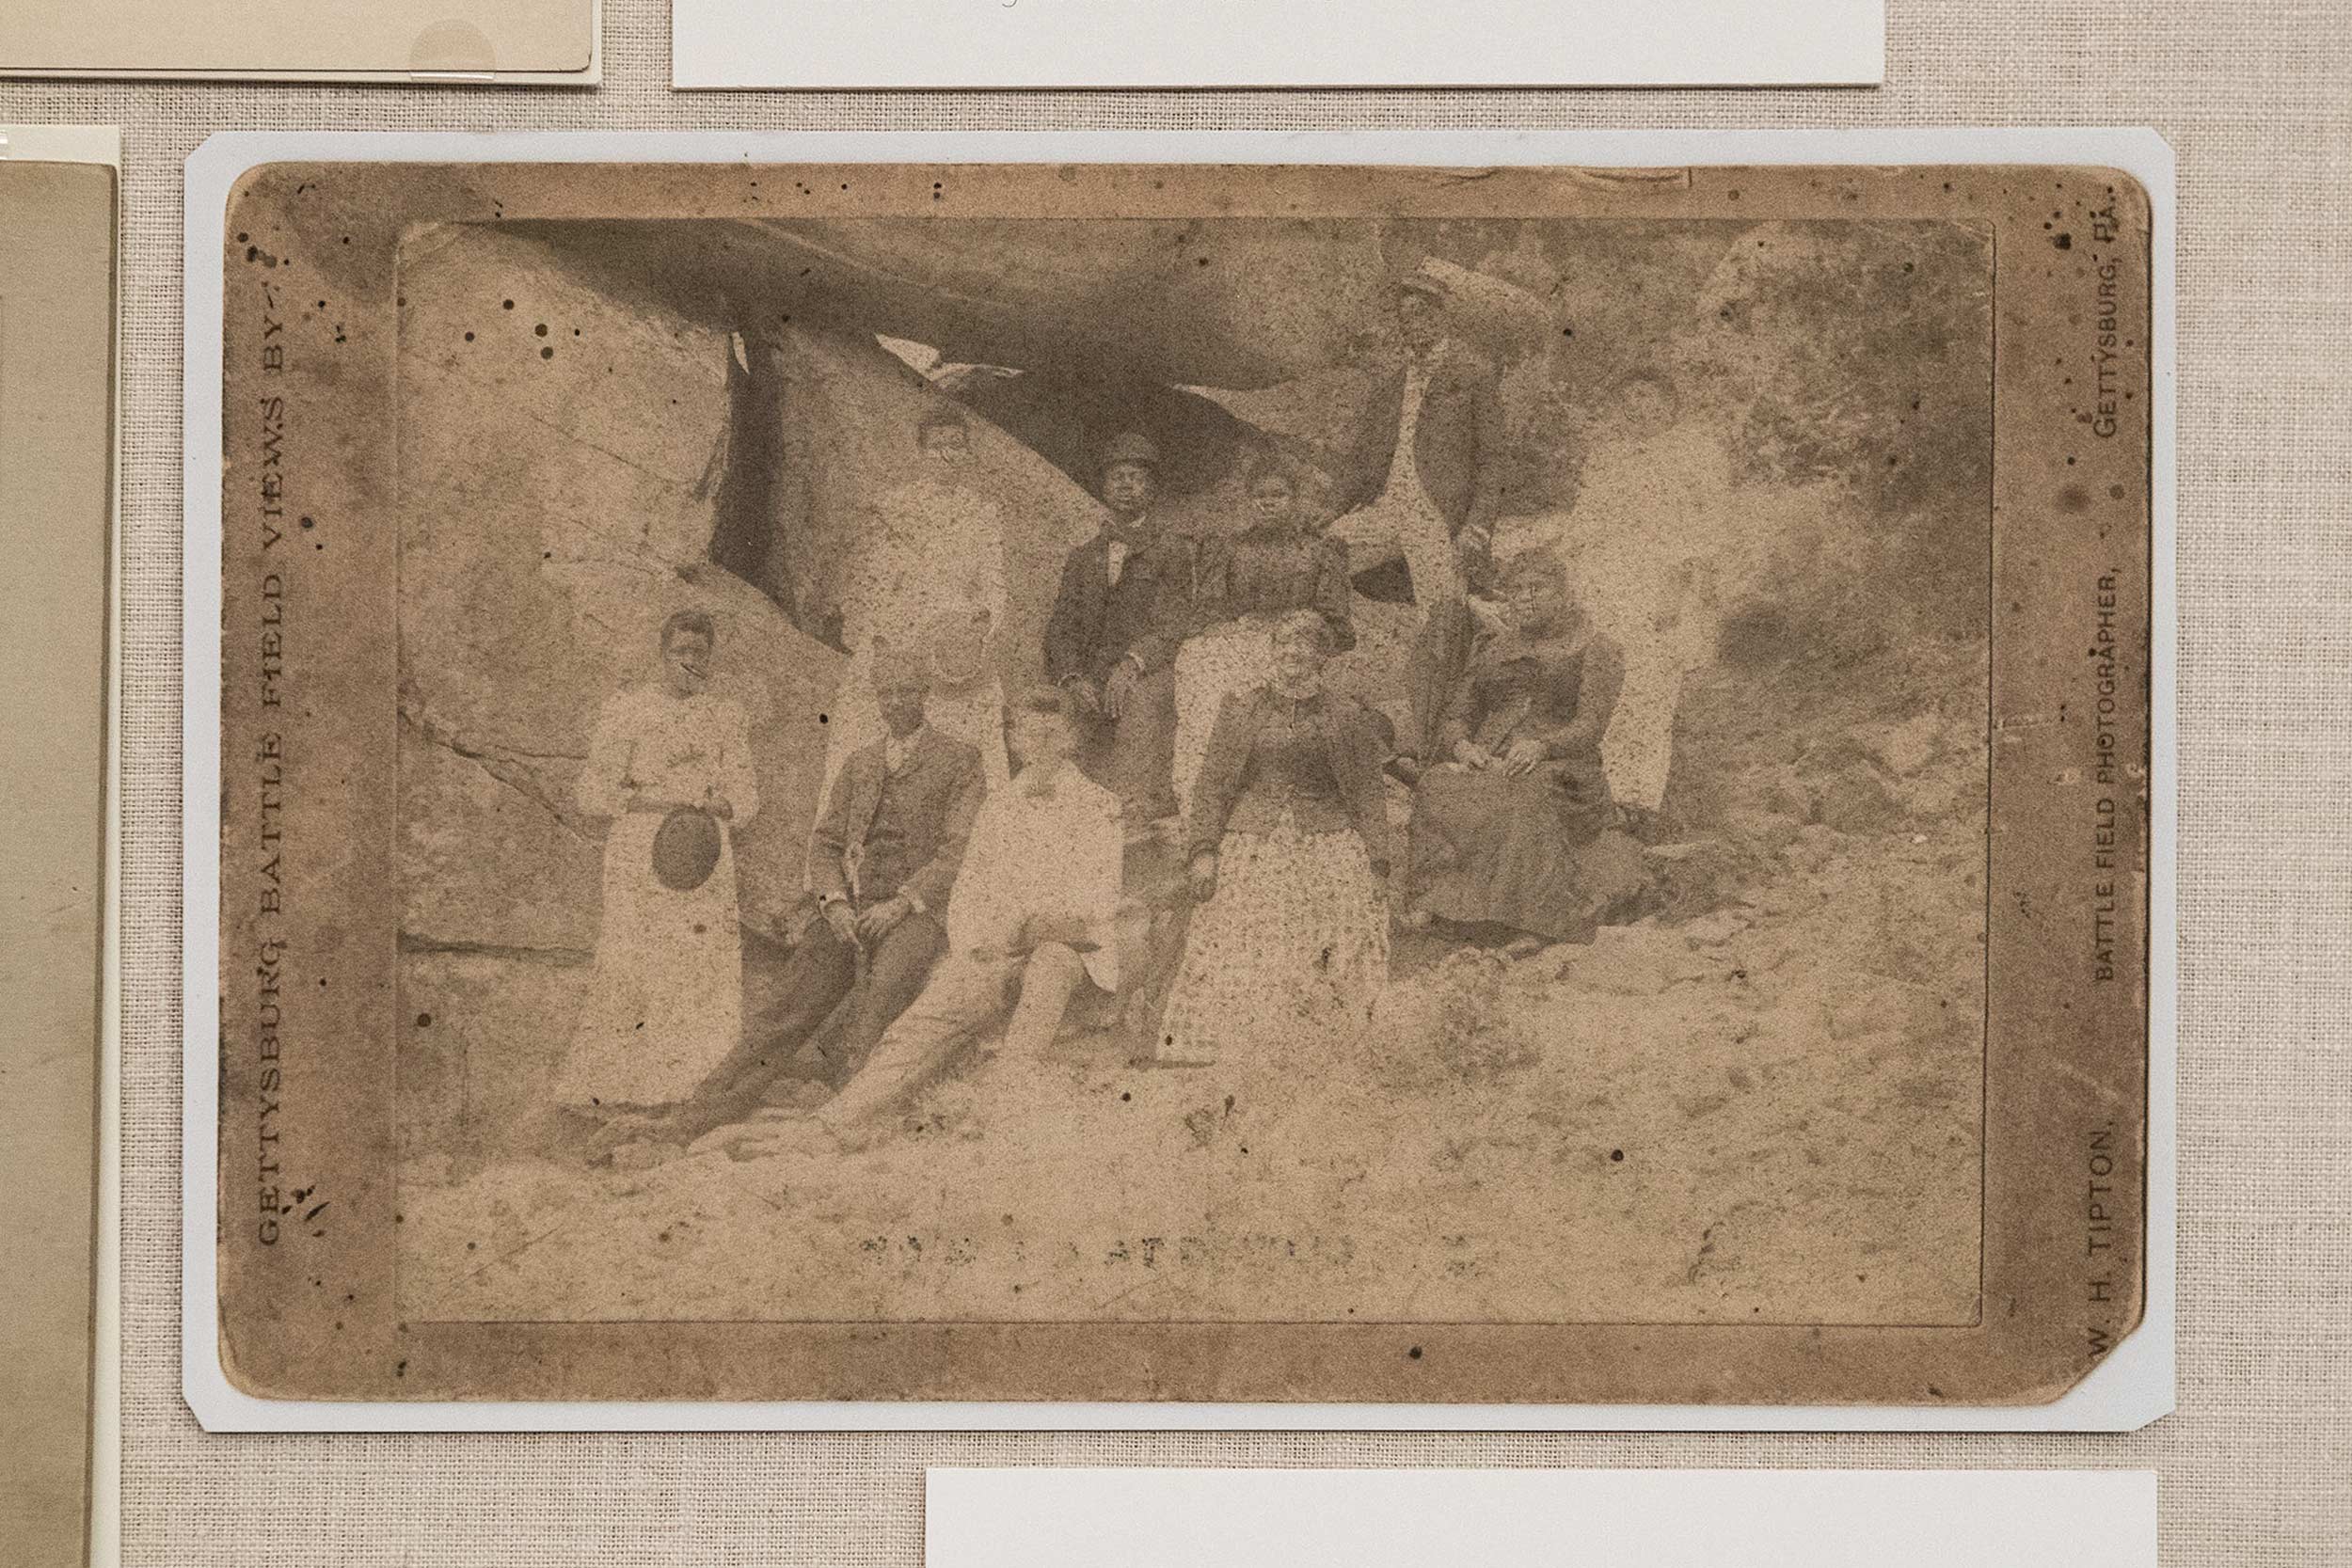 facsimile of an album in print circa 1890s of a group of black tourists visiting Gettysburg Battlefield.